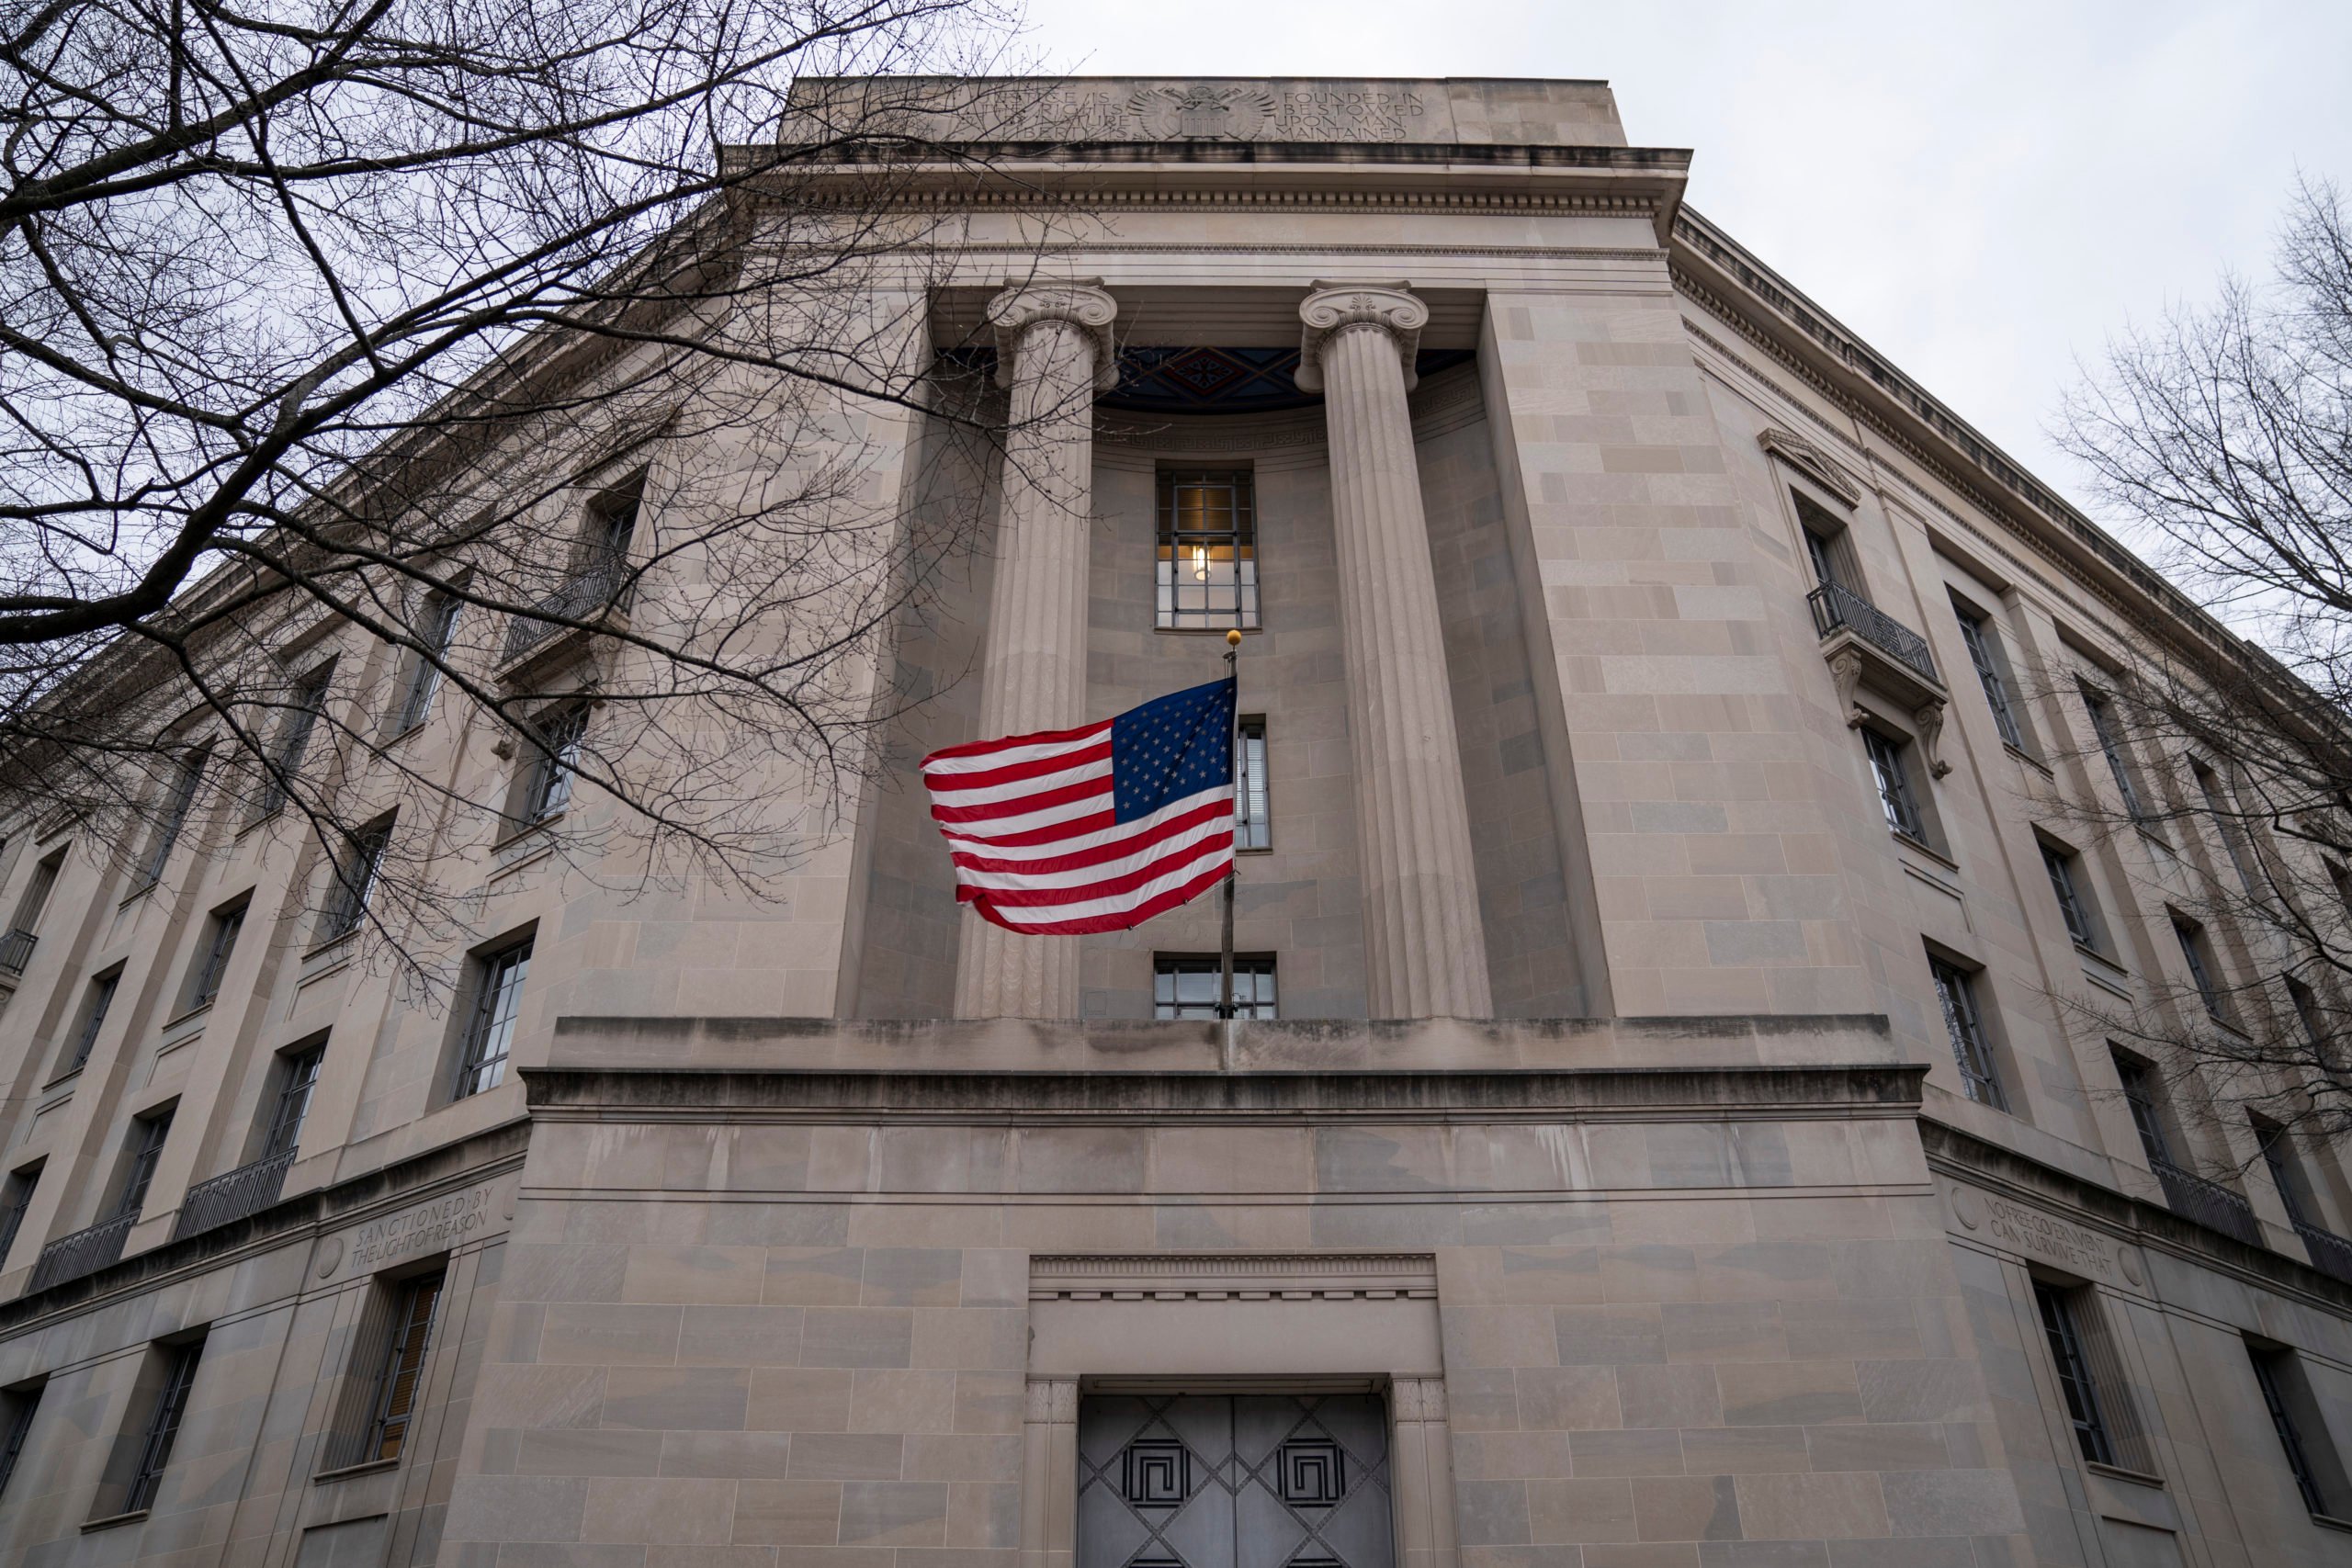 WASHINGTON, DC - FEBRUARY 19: The Department of Justice headquarters stands on February 19, 2020 in Washington, DC. A Department of Justice spokesperson is denying that Attorney General William Barr is considering resigning after his critical comments about President Trump Trump tweeting about ongoing Department of Justice cases. (Photo by Drew Angerer/Getty Images)